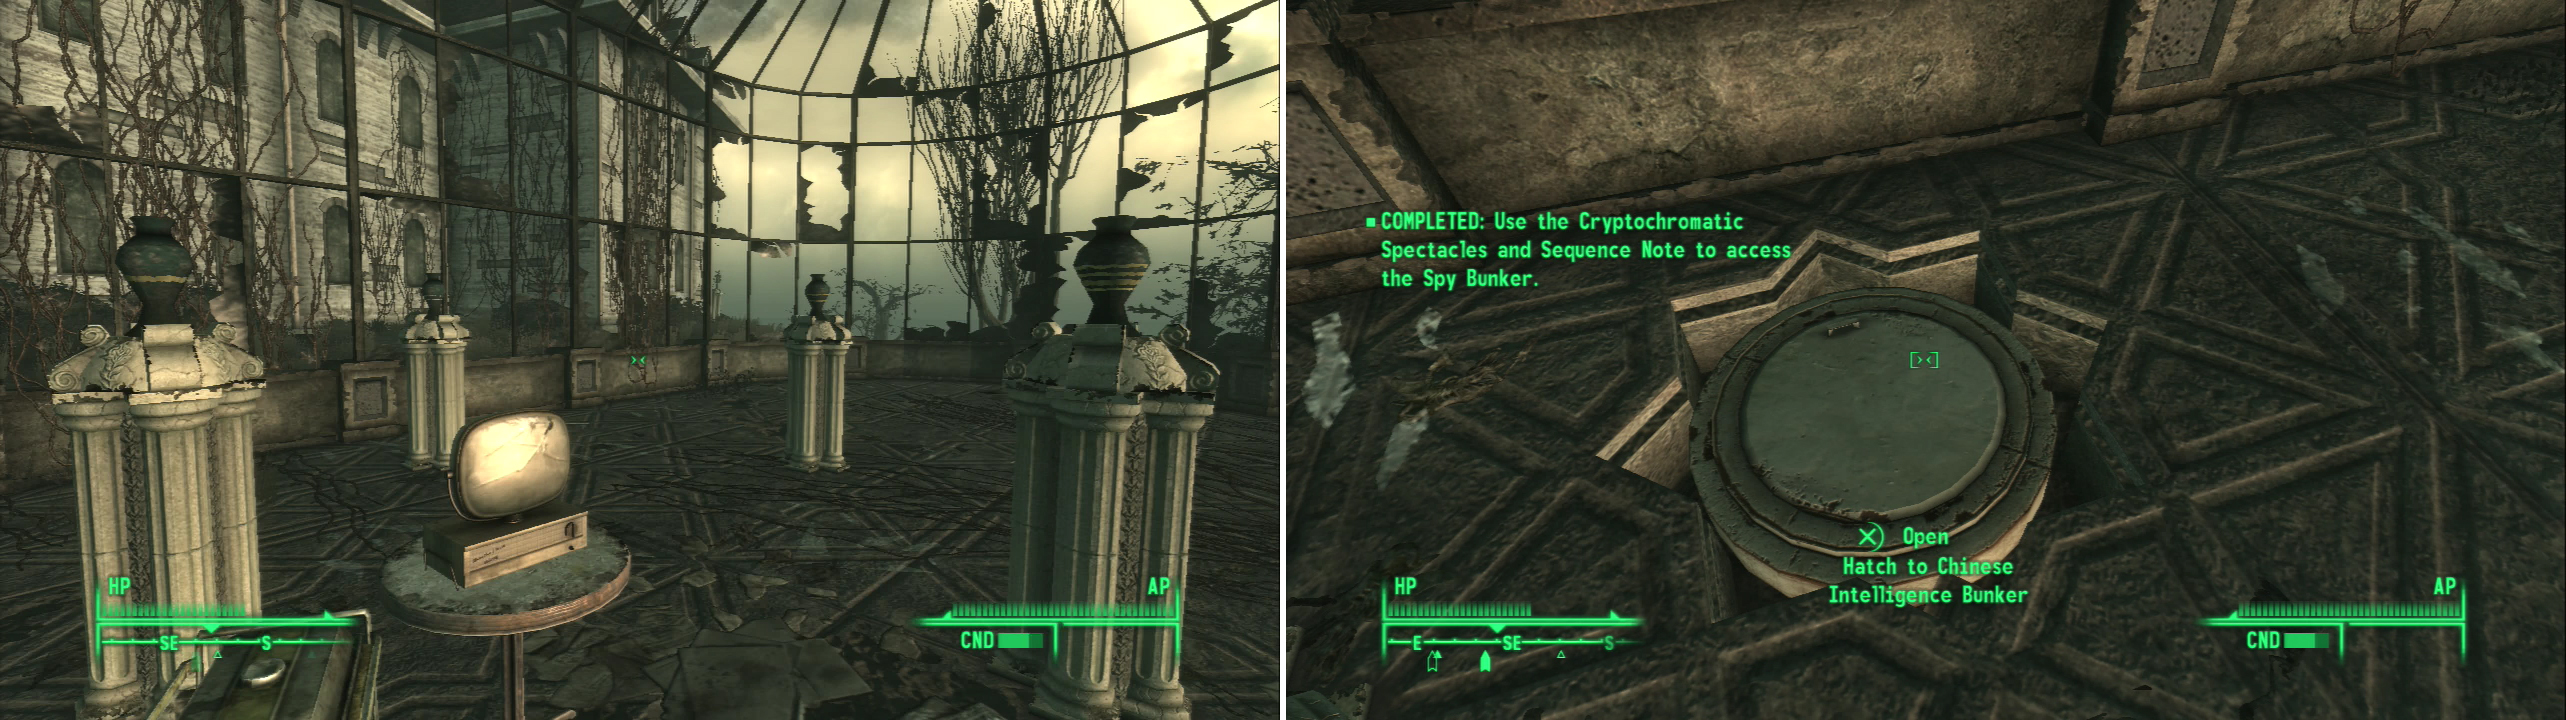 Put on the glasses you fished out from the back of hte swamp motel forest in order to detect the otherwise invisible rings on the urns in the greenhouse (left). Touch the urns in the correct sequence to open up a hidden bunker (right).